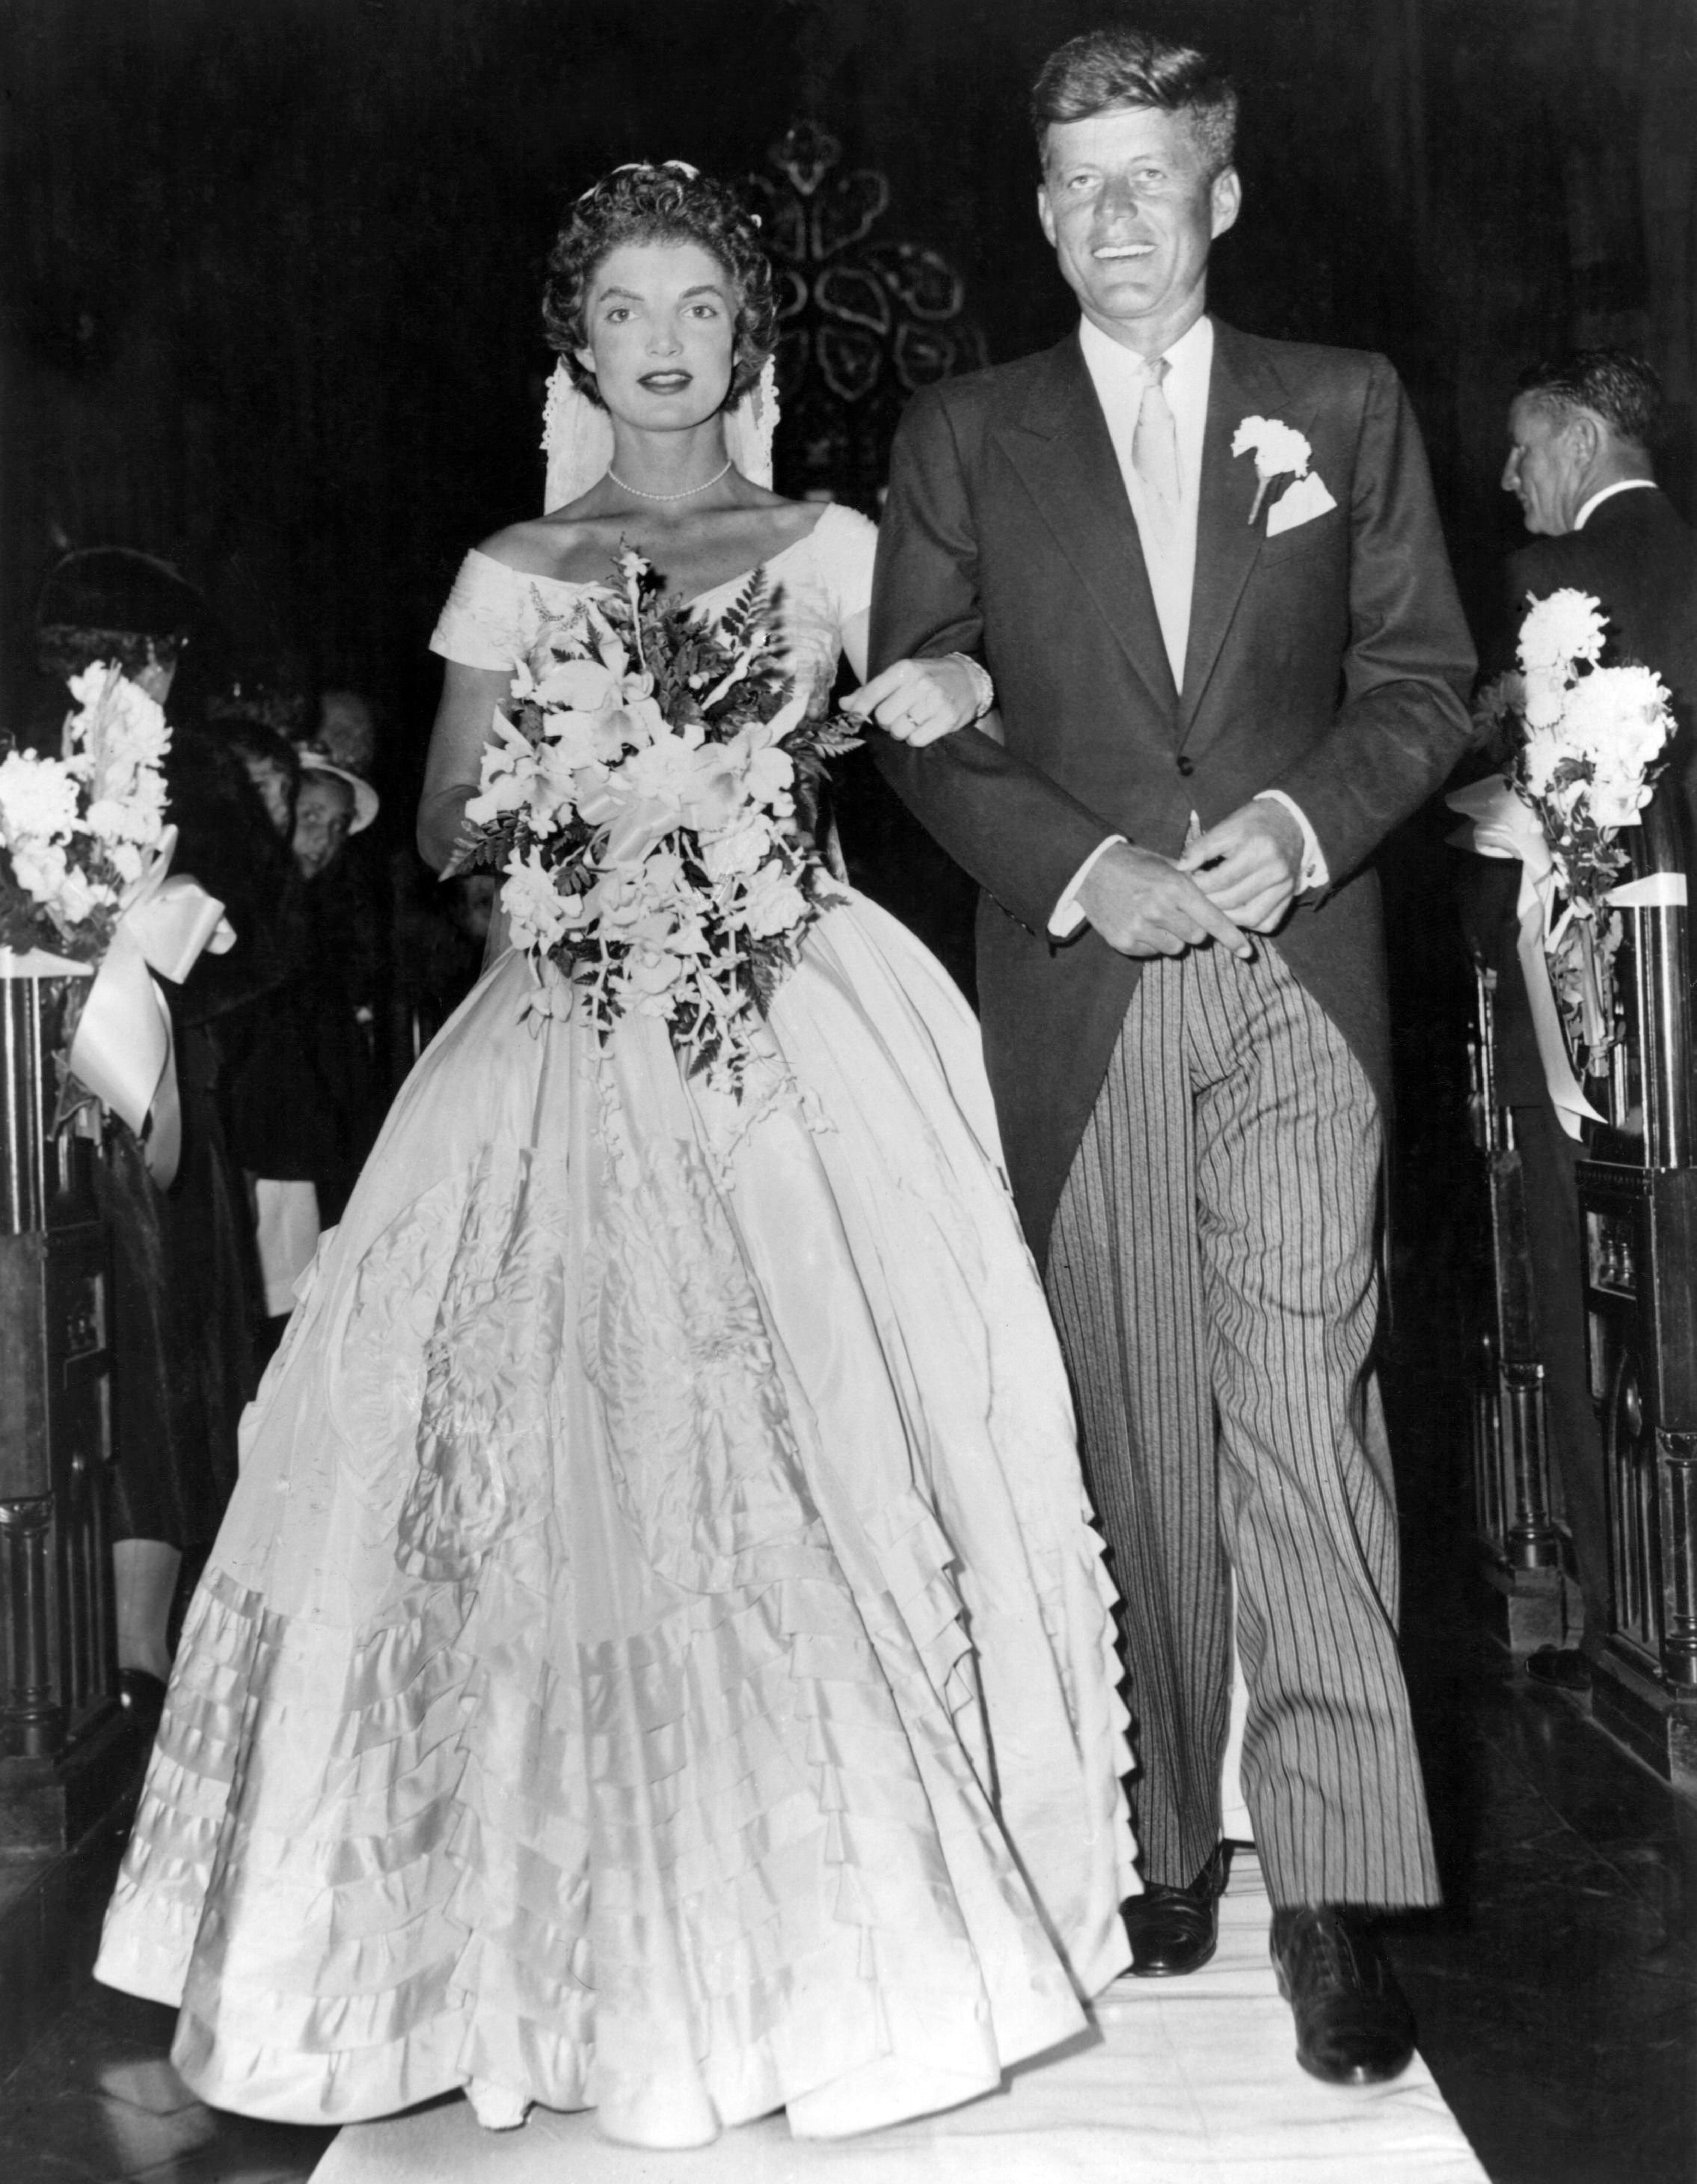 Senator John Fitzgerald Kennedy escorts his bride Jacqueline Lee Bouvier shortly after their wedding ceremony on September 12, 1953, at Newport, Rhode Island | Source: Getty Images